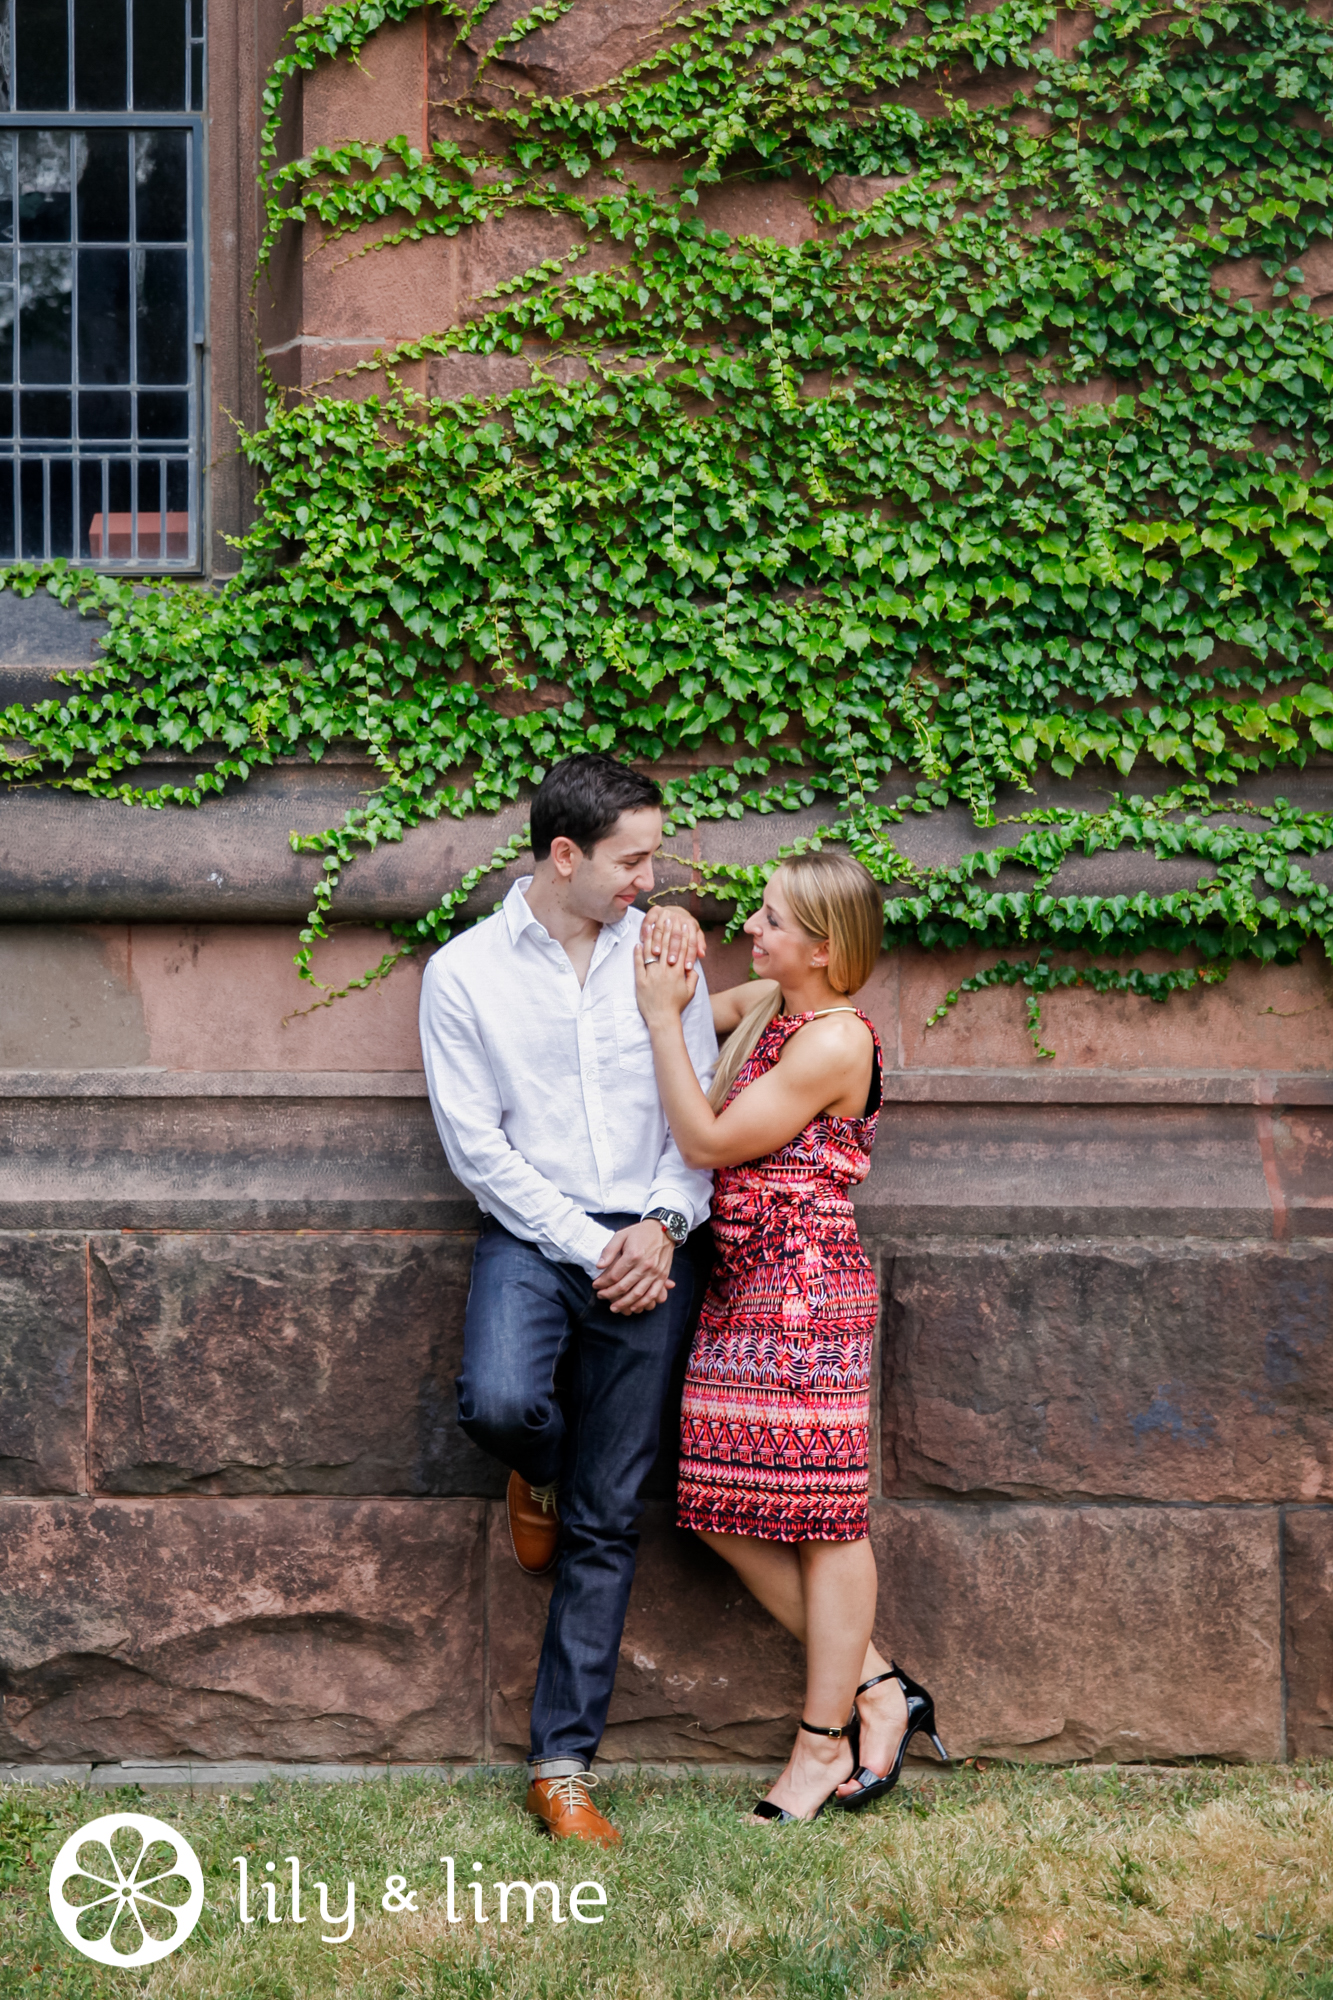 engagement photo tips and advice